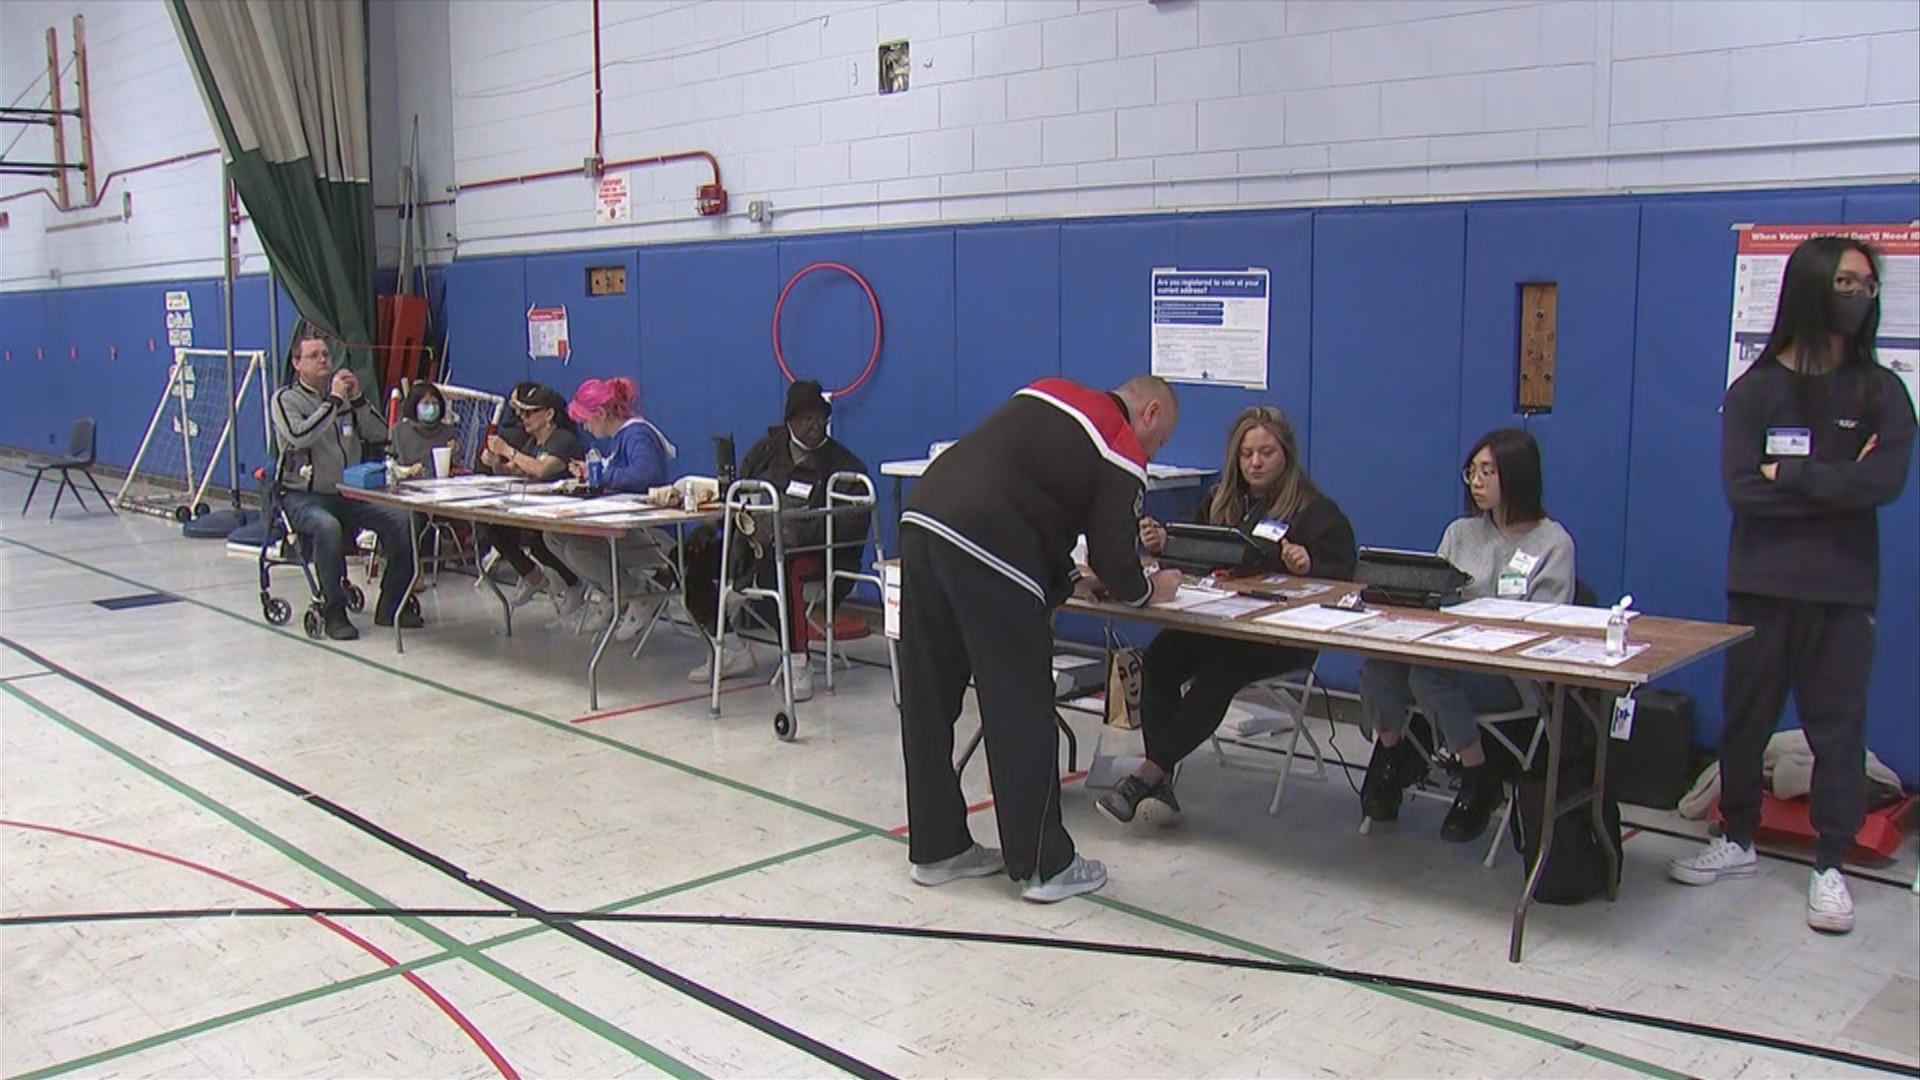 Voters cast their ballots on Election Day on Feb. 28, 2023, at Healy Elementary School, 3040 S. Parnell Ave. (WTTW News)